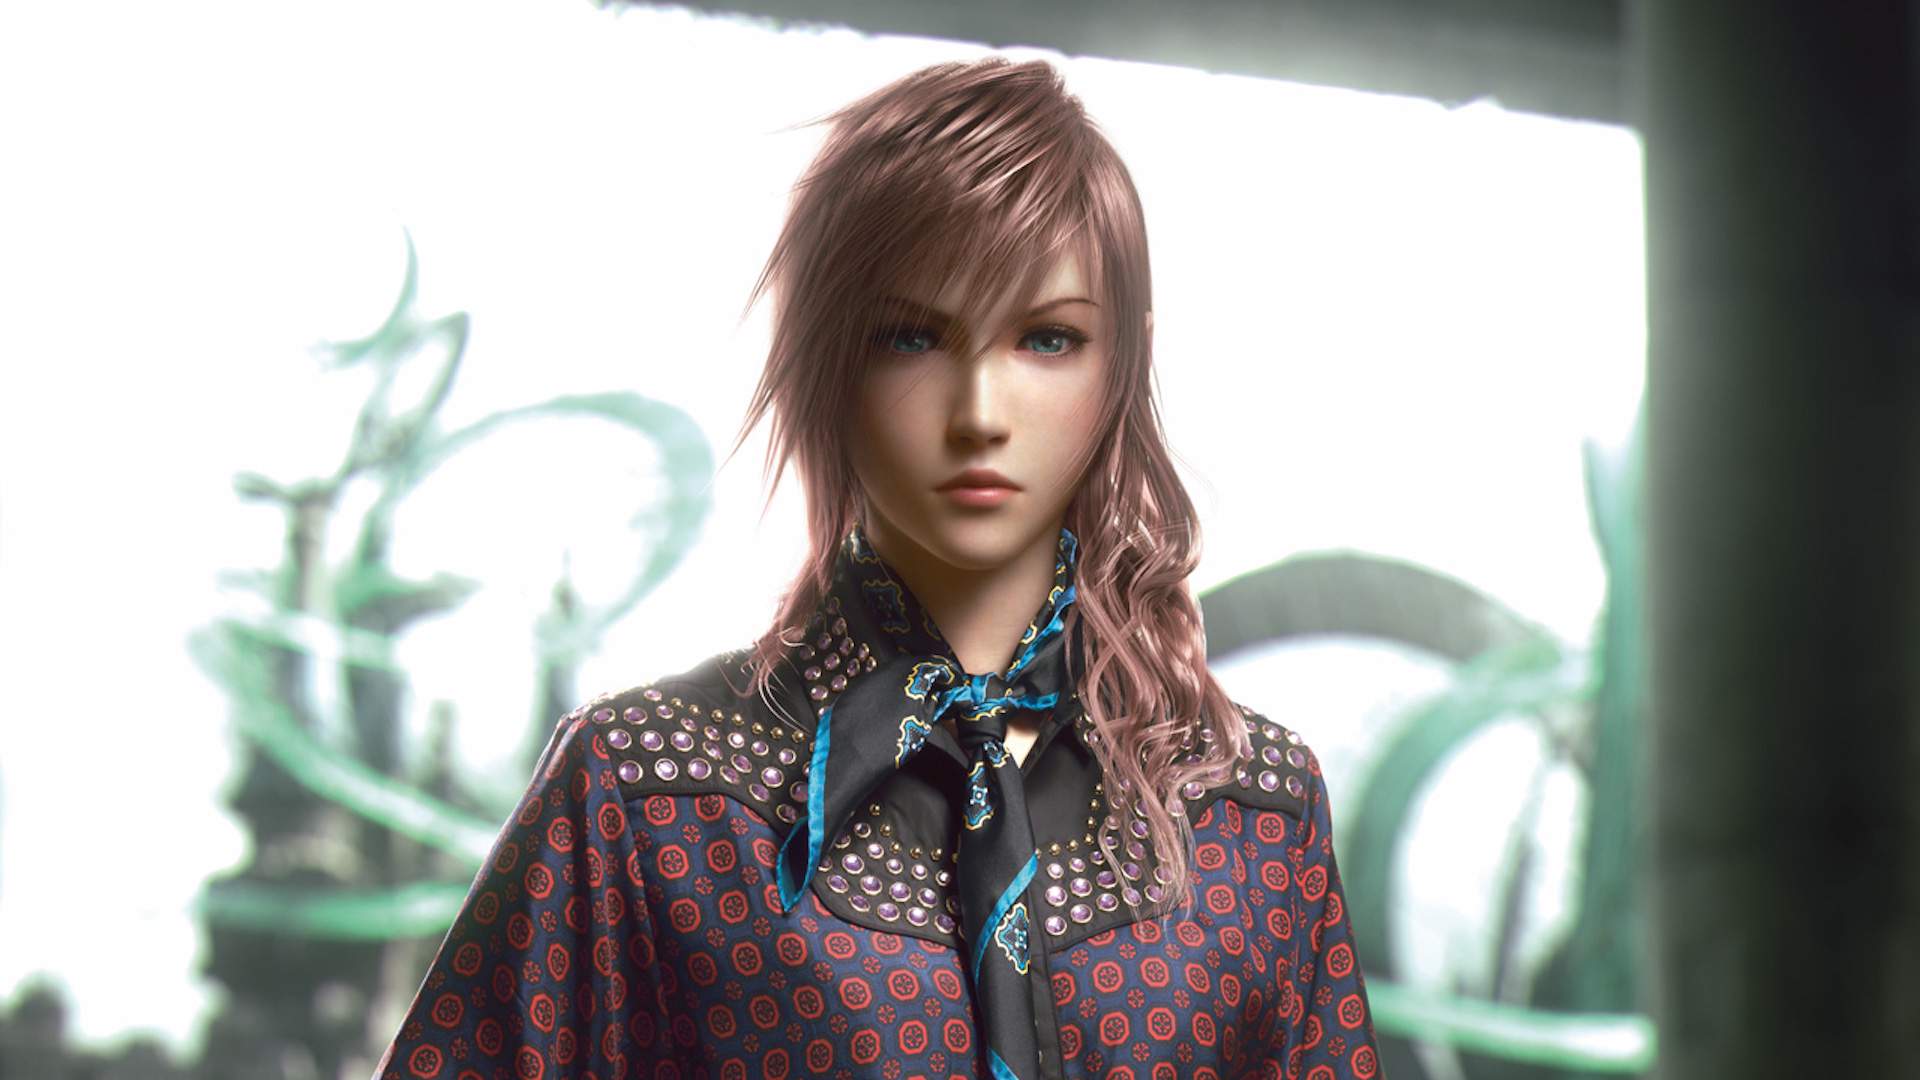 Final Fantasy characters showcase Prada's 2012 collection